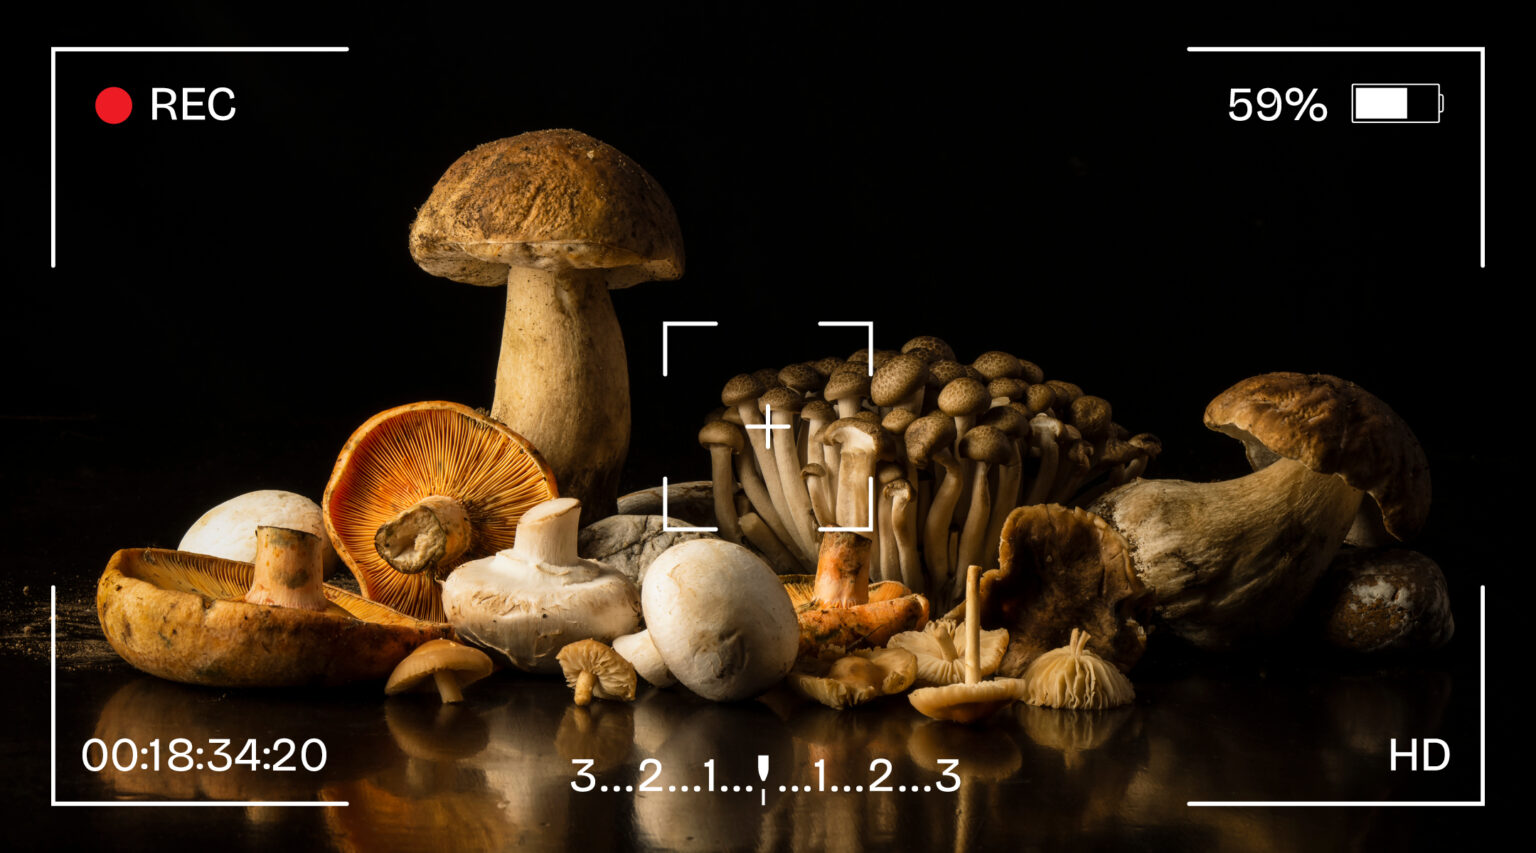 Granite Bay Graphic Design: Photography: Example of Still Life Photography: A Variety of Mushrooms with Reflection on a Black Background